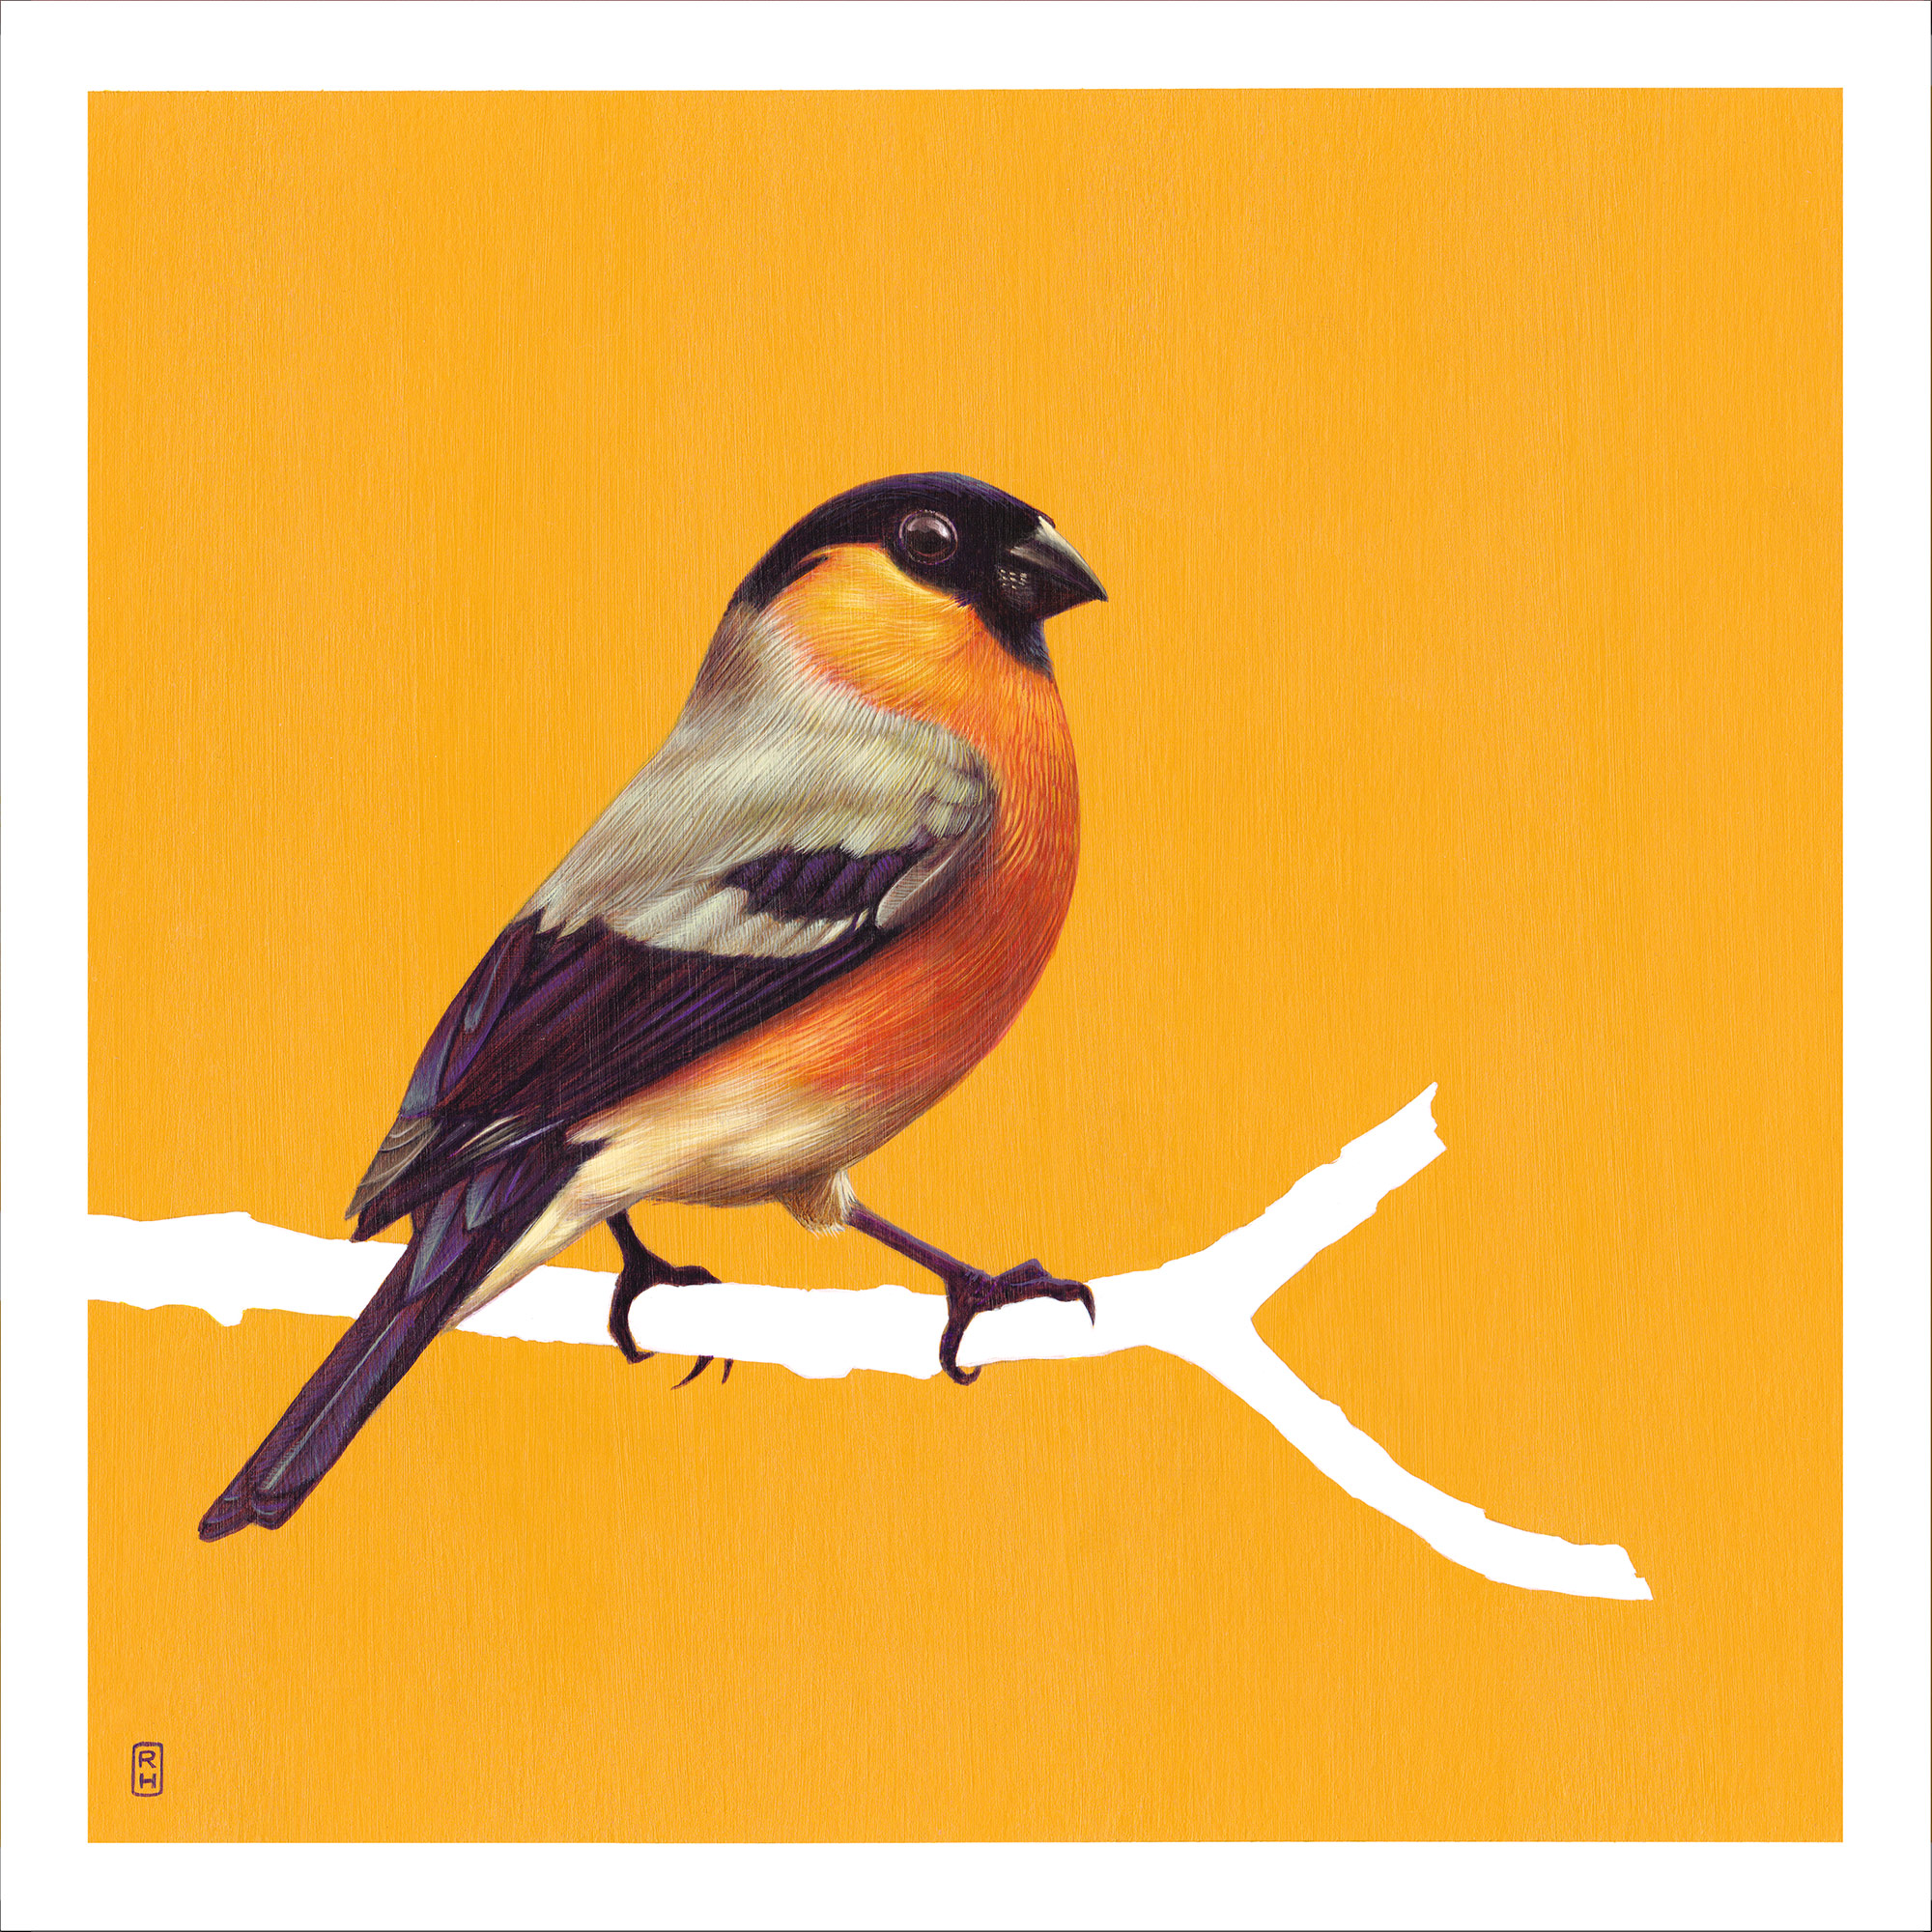 Painting of a bullfinch